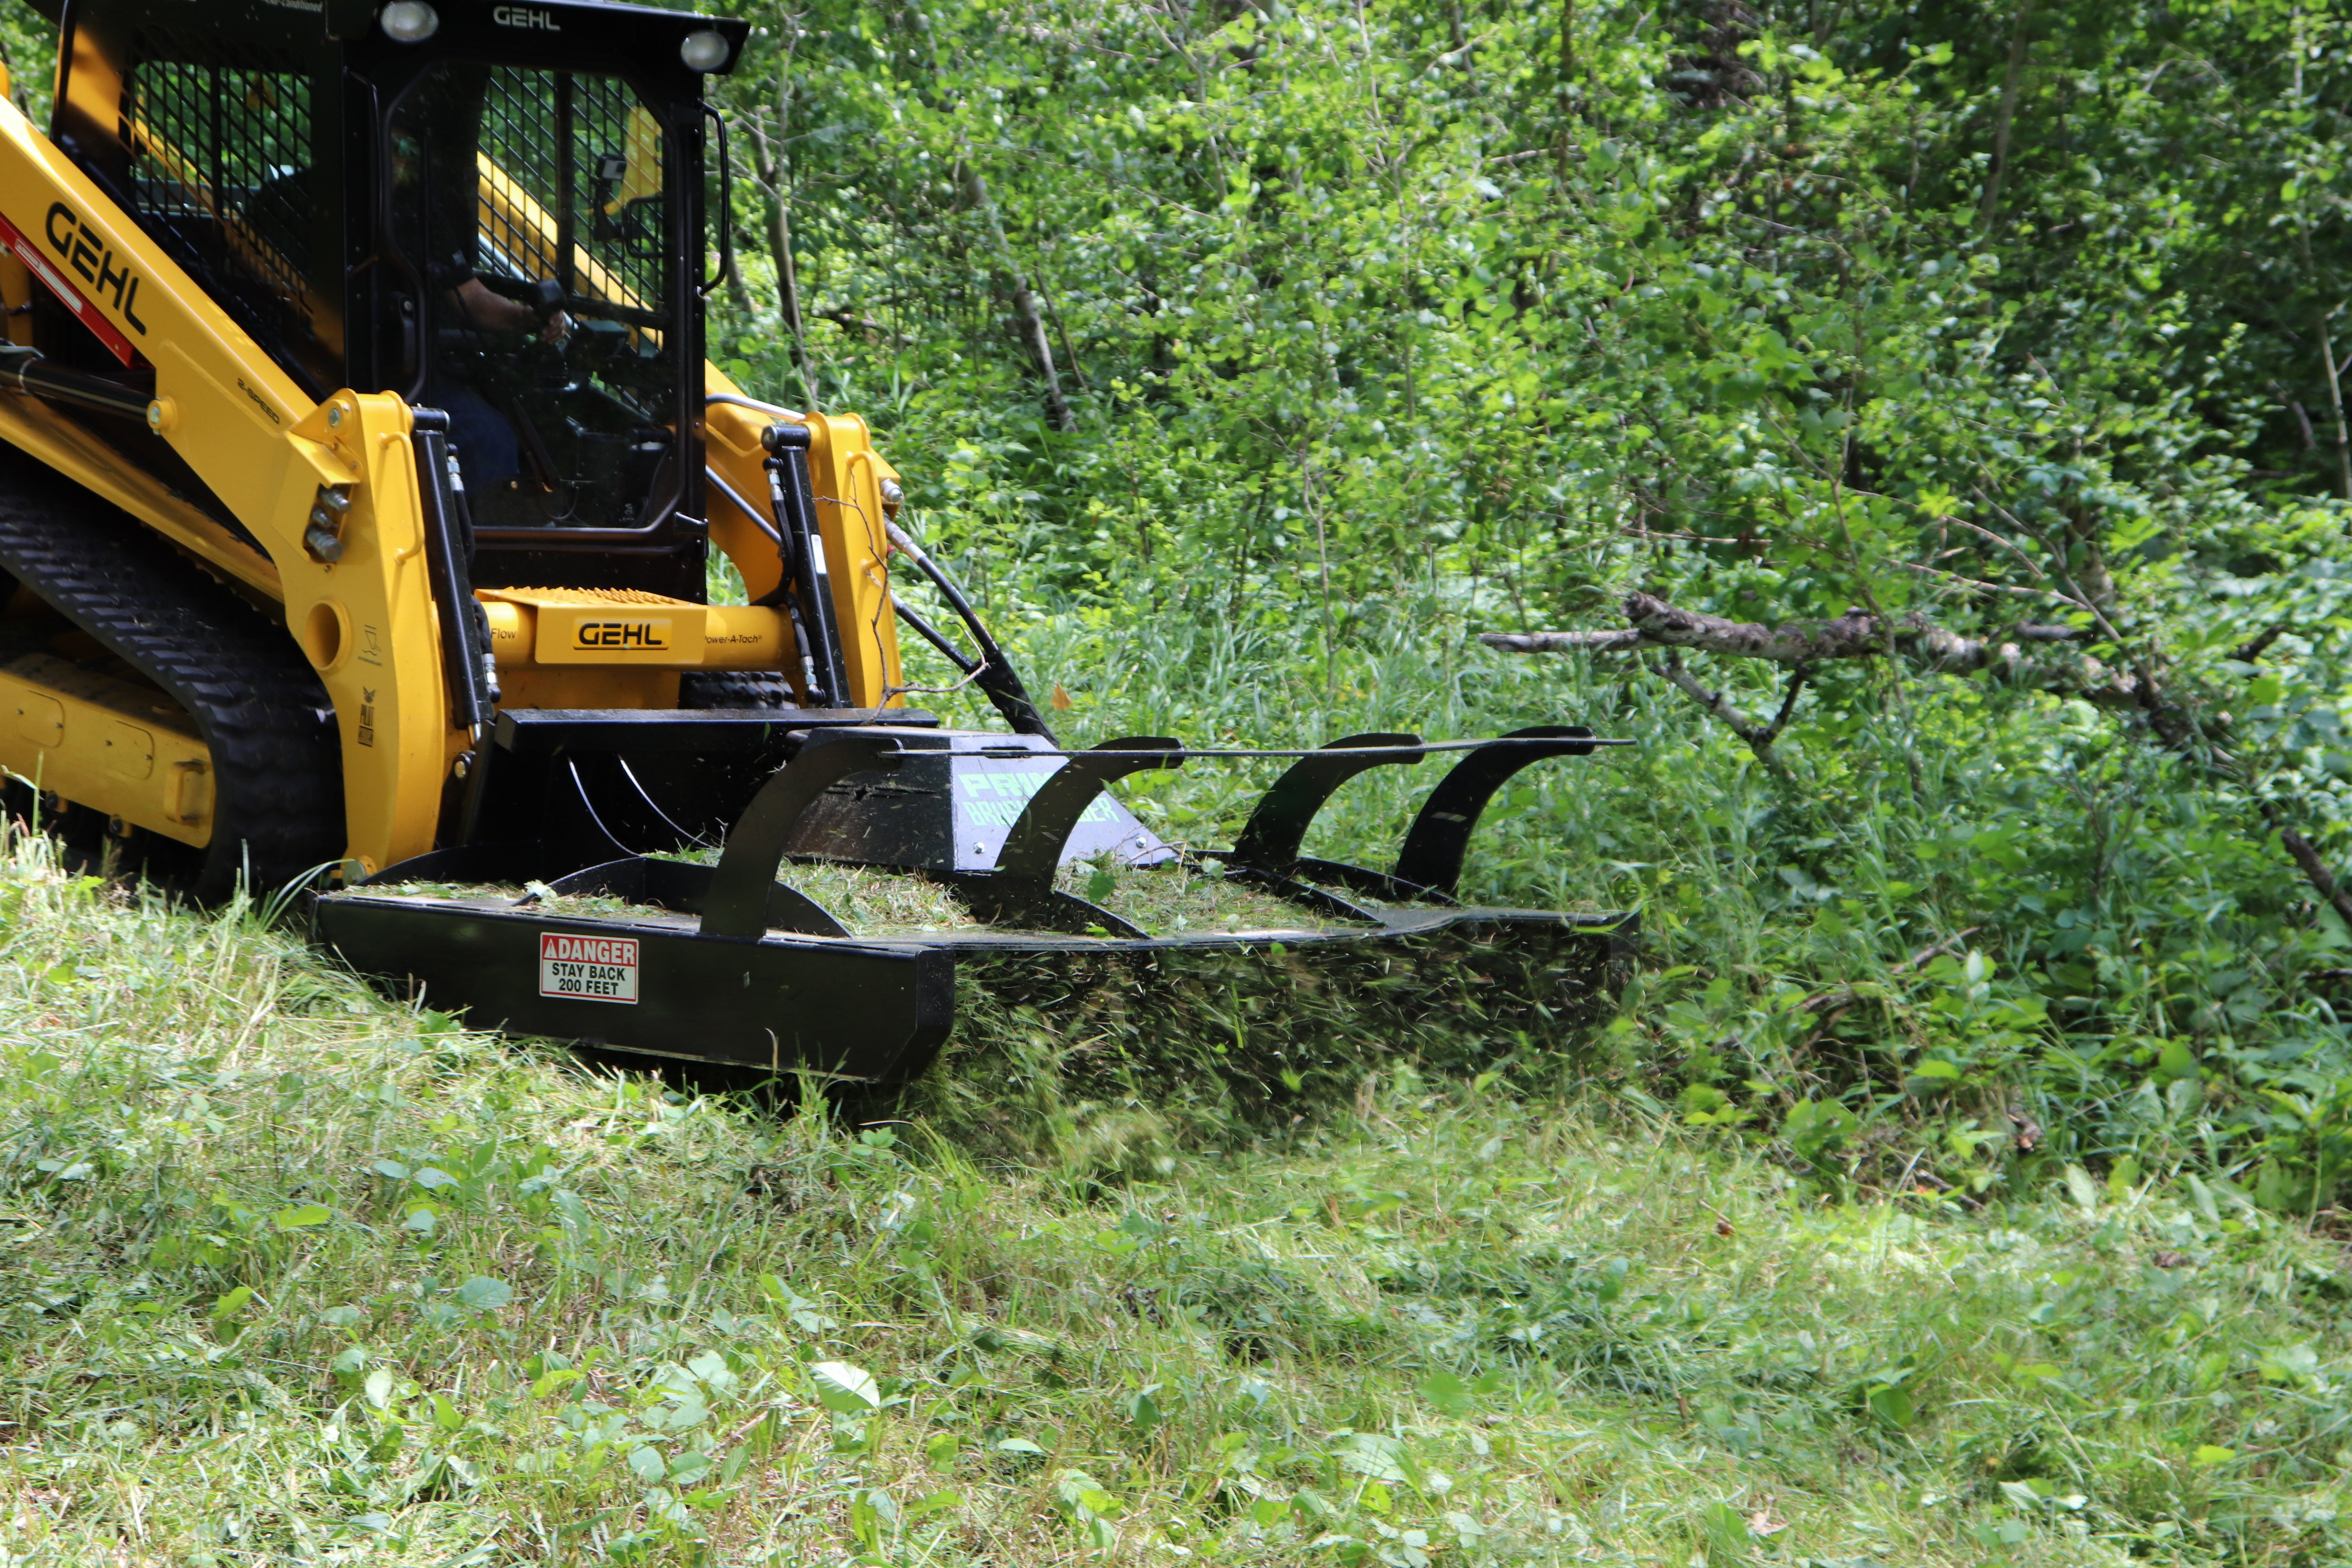 6 Prime Skid Steer Attachments For Clearing Brush Like a Boss